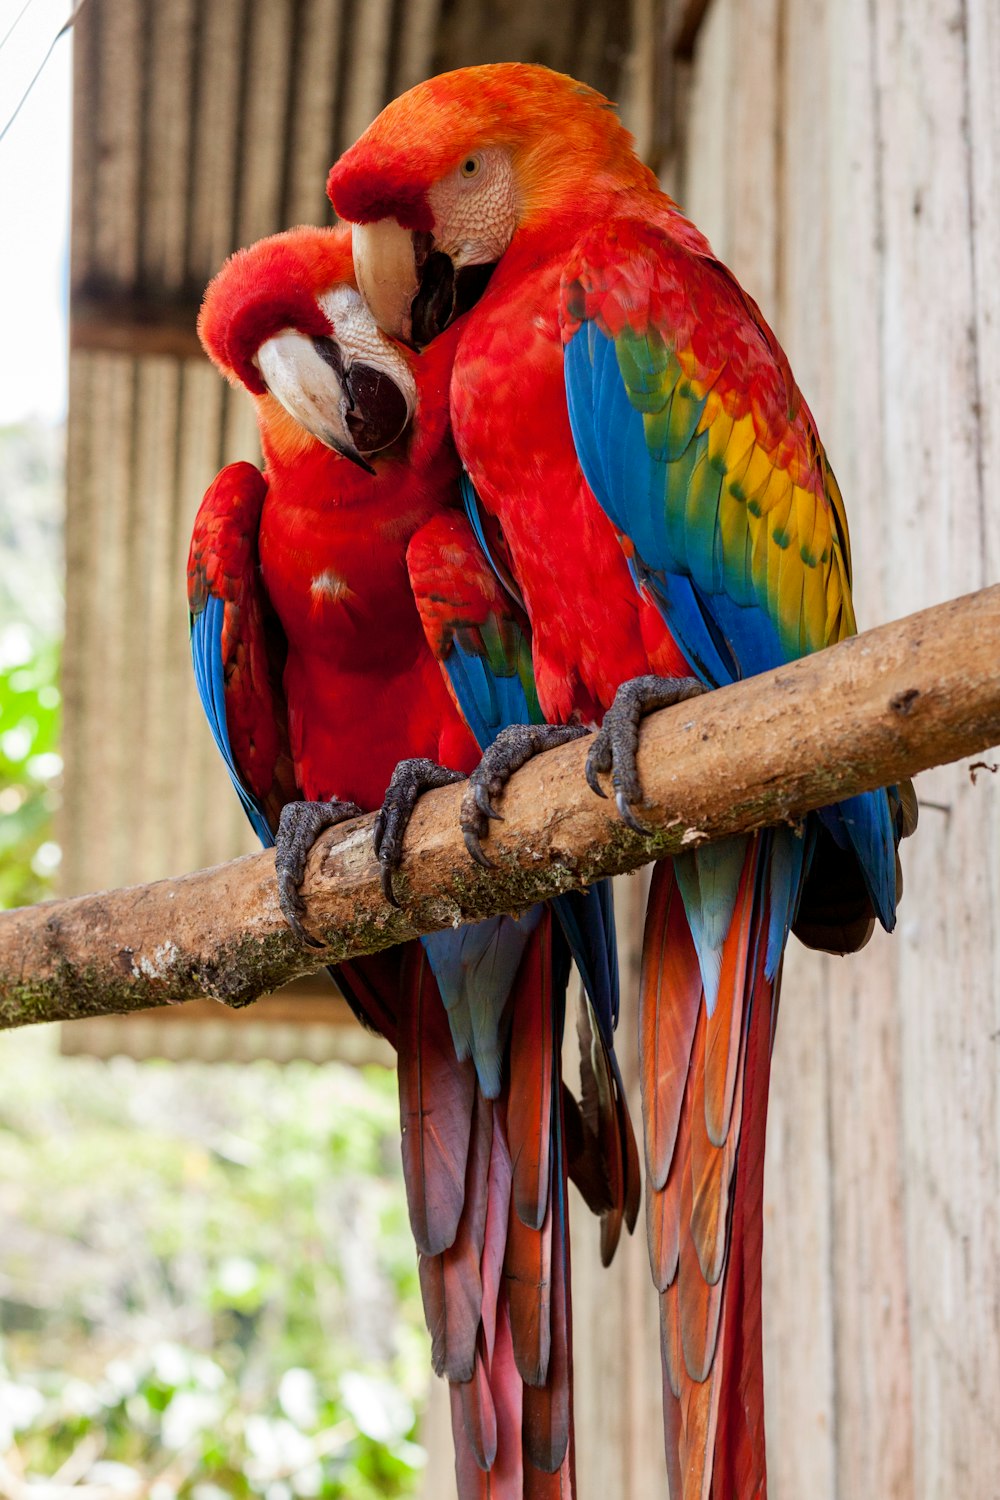 two red parrots on stick